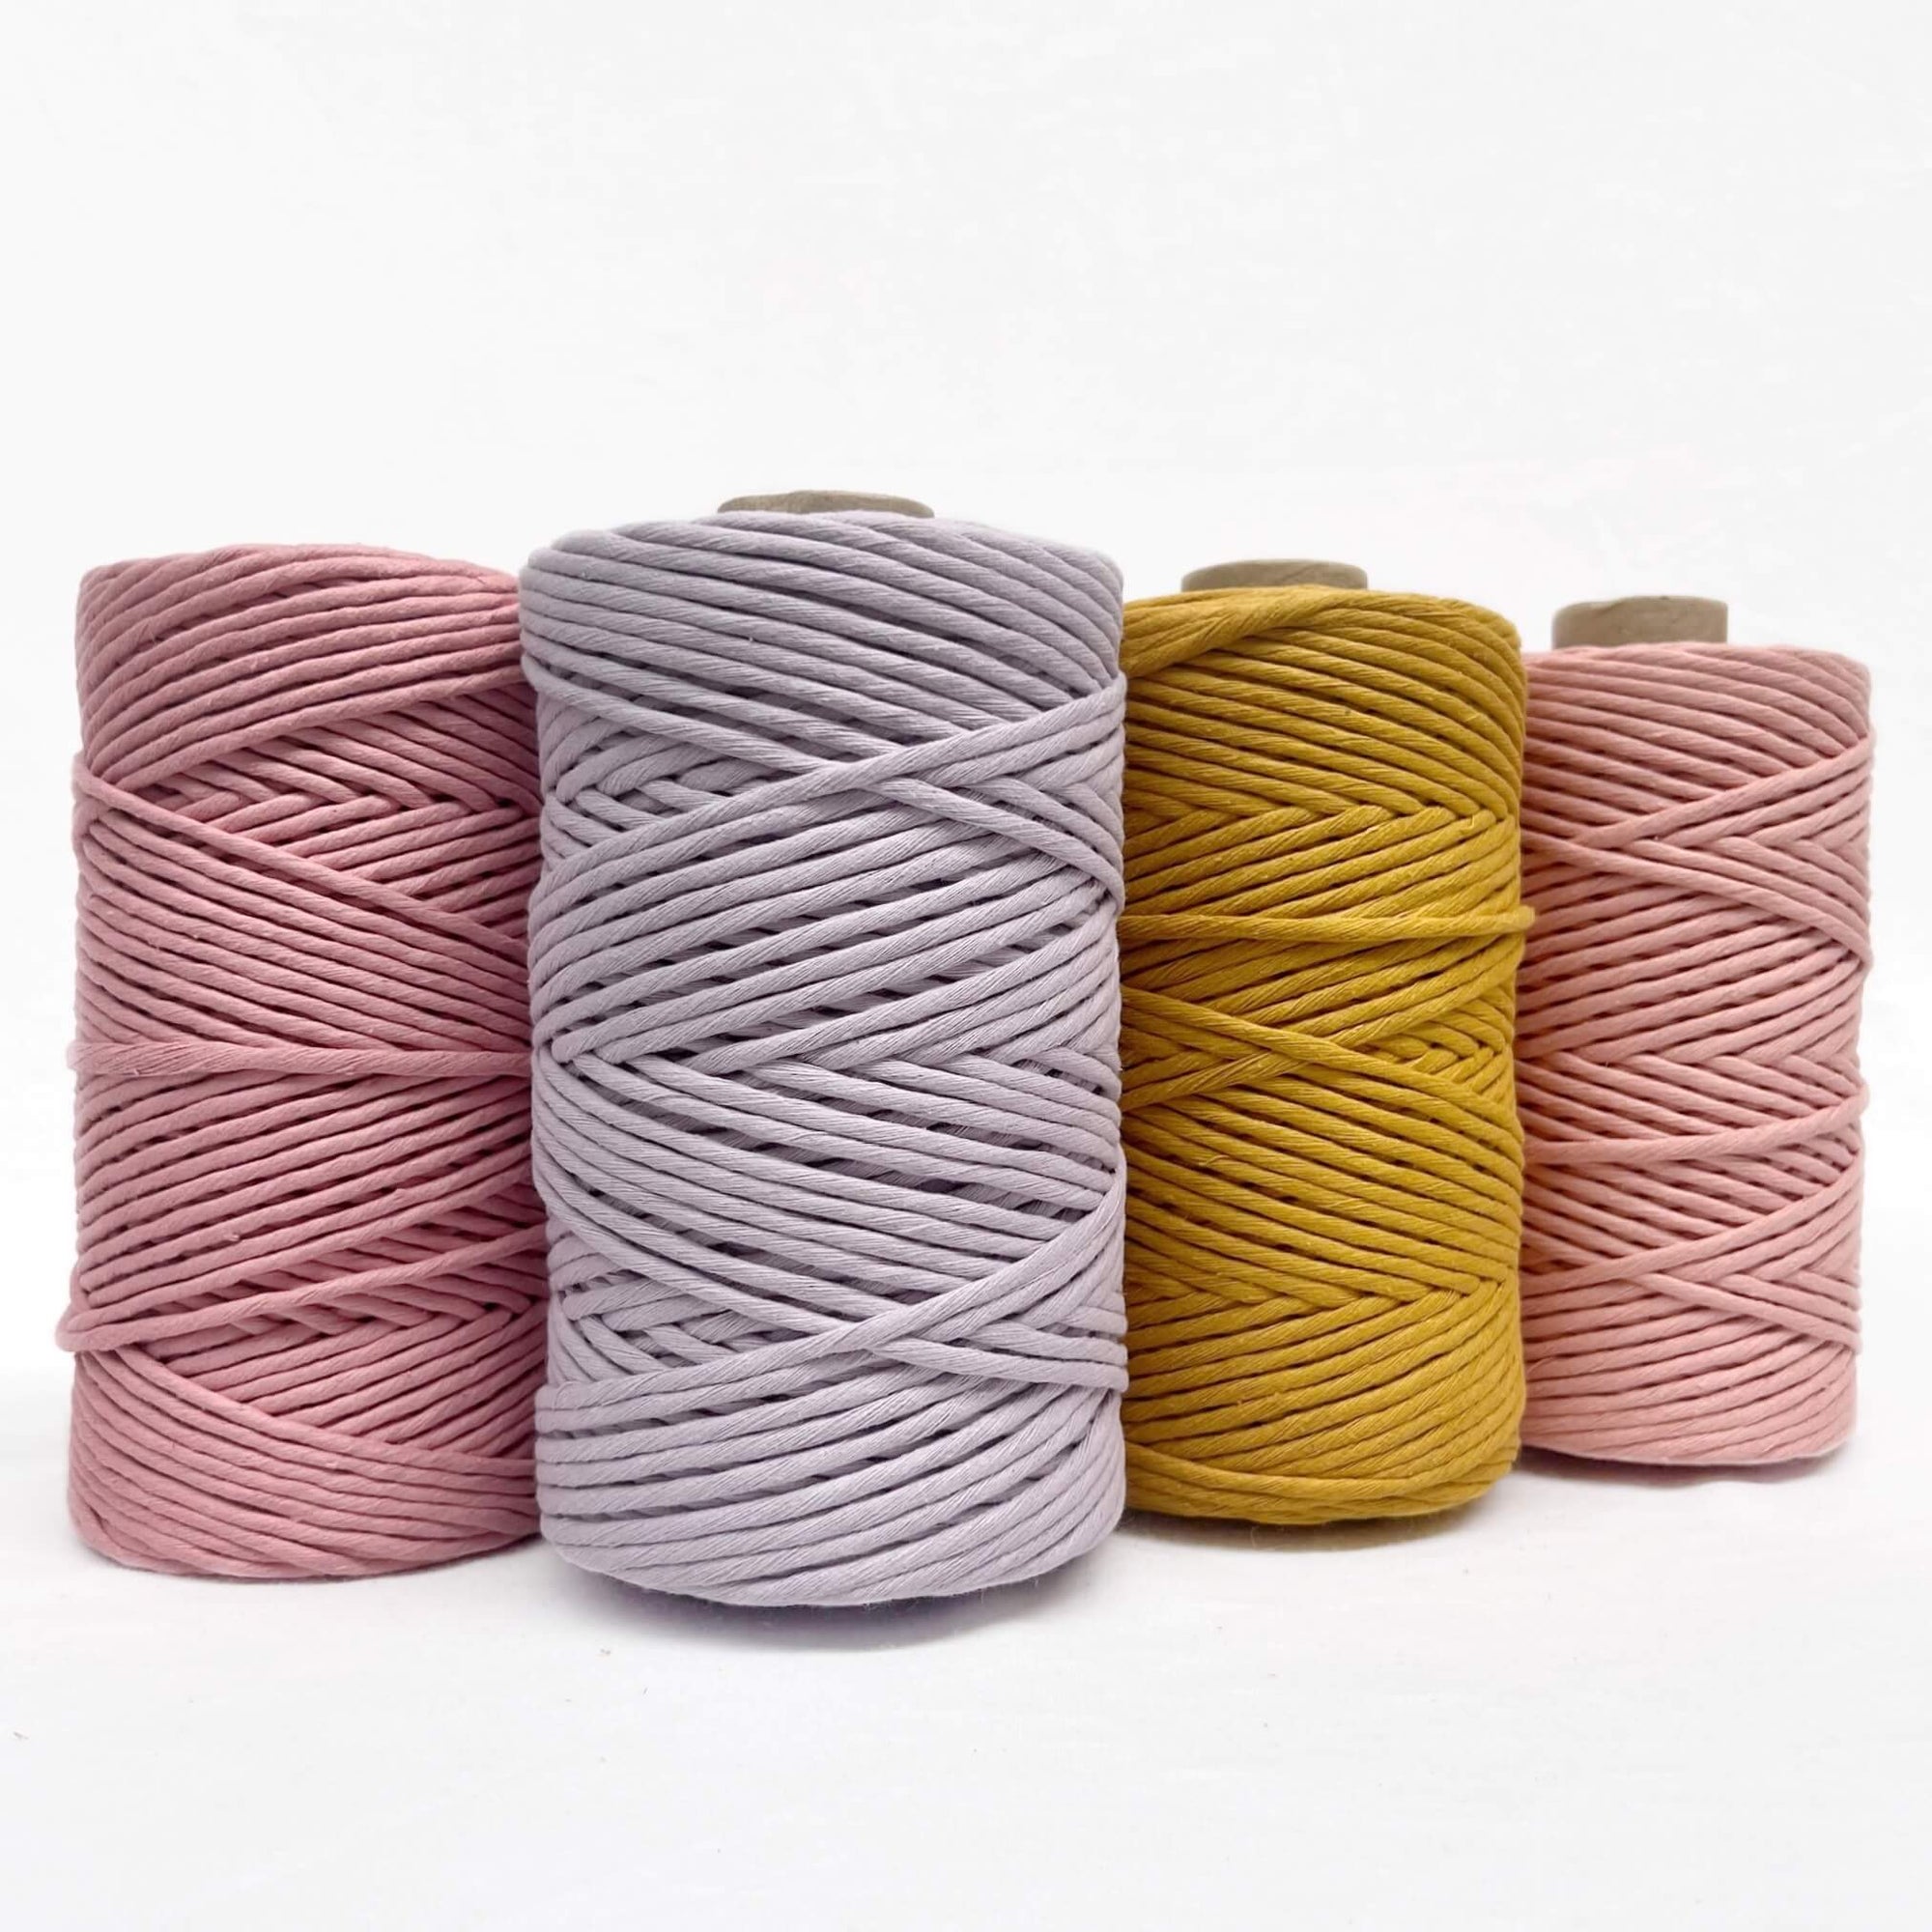 mary maker studio 1kg 5mm recycled cotton macrame string in warm baked blush pink colour suitable for macrame workshops beginners and advanced artists